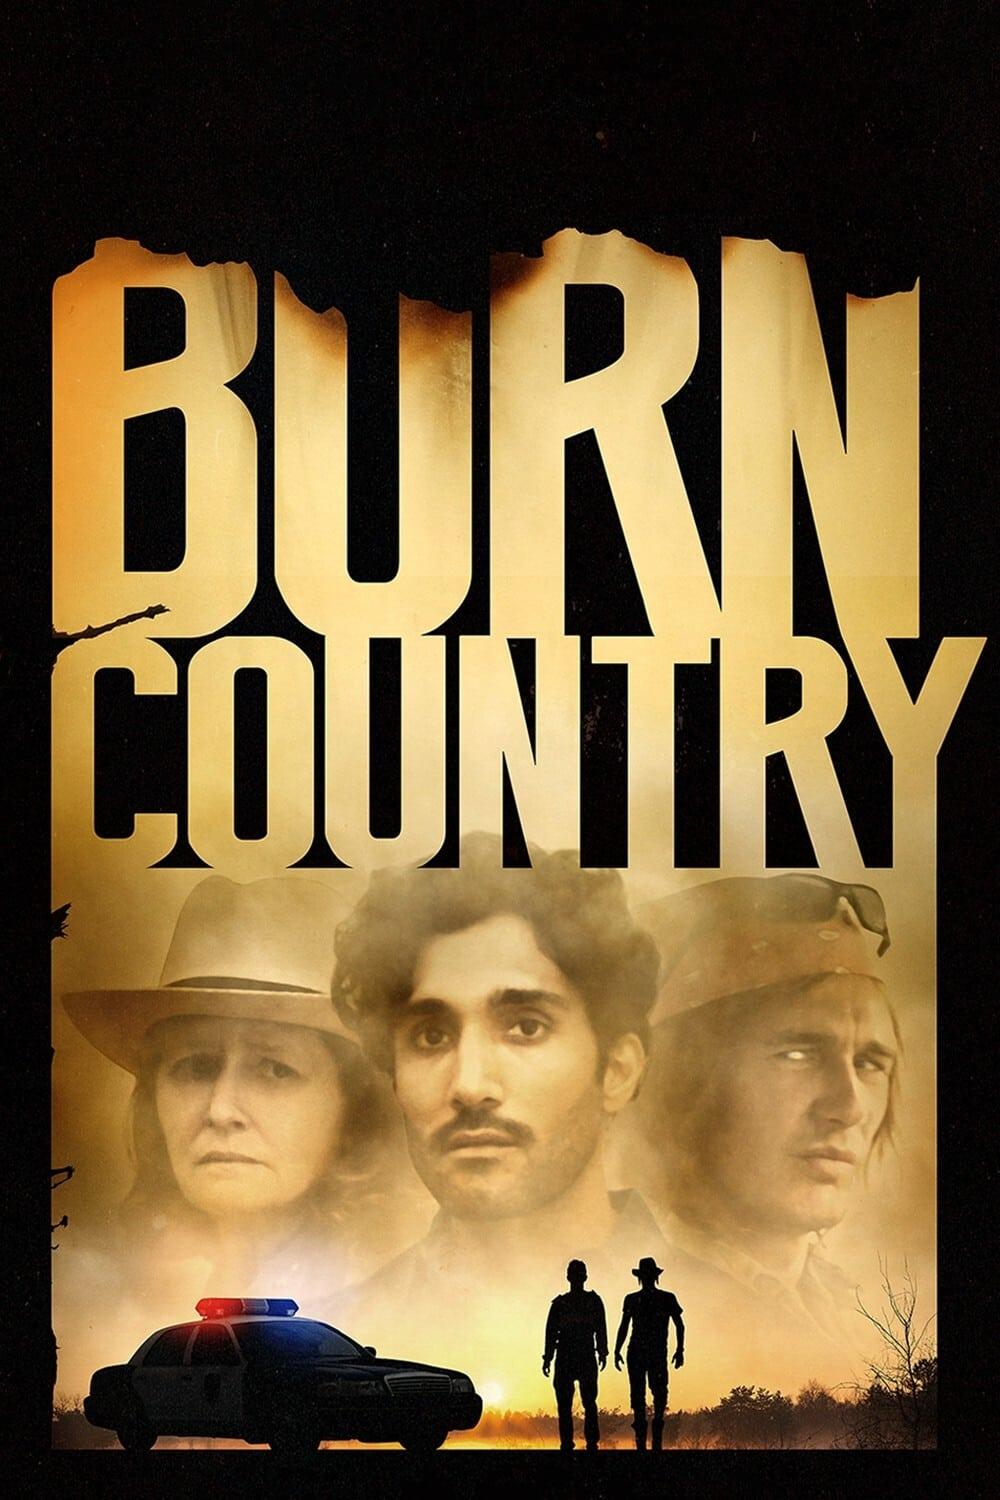 Burn Country poster